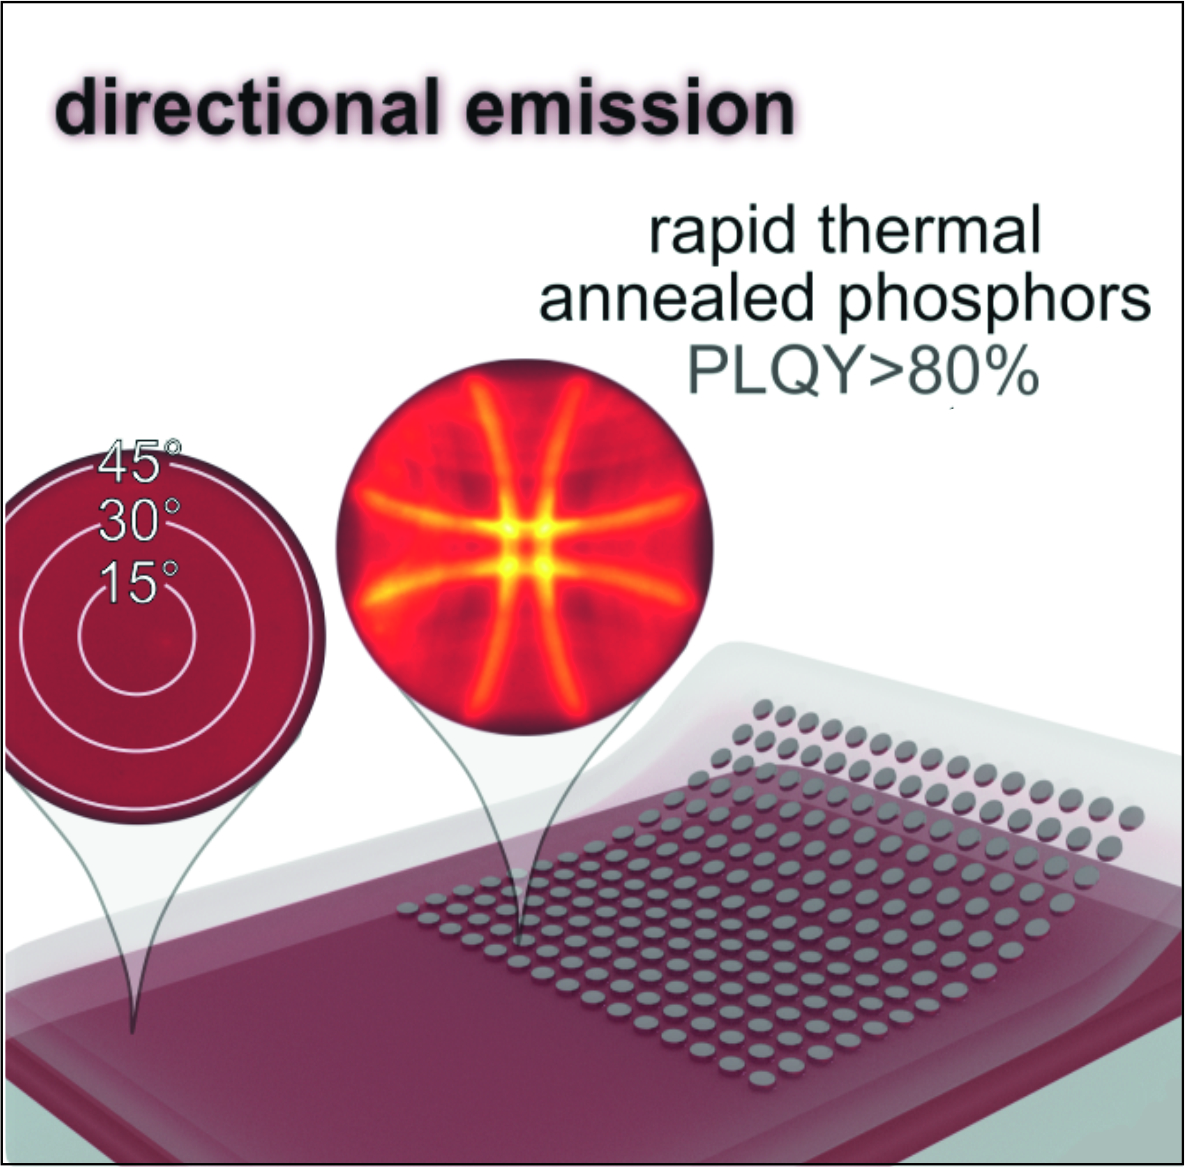 Collective plasmonic resonances enhance the photoluminescence of rare-earth nanocrystal films processed by ultrafast annealing